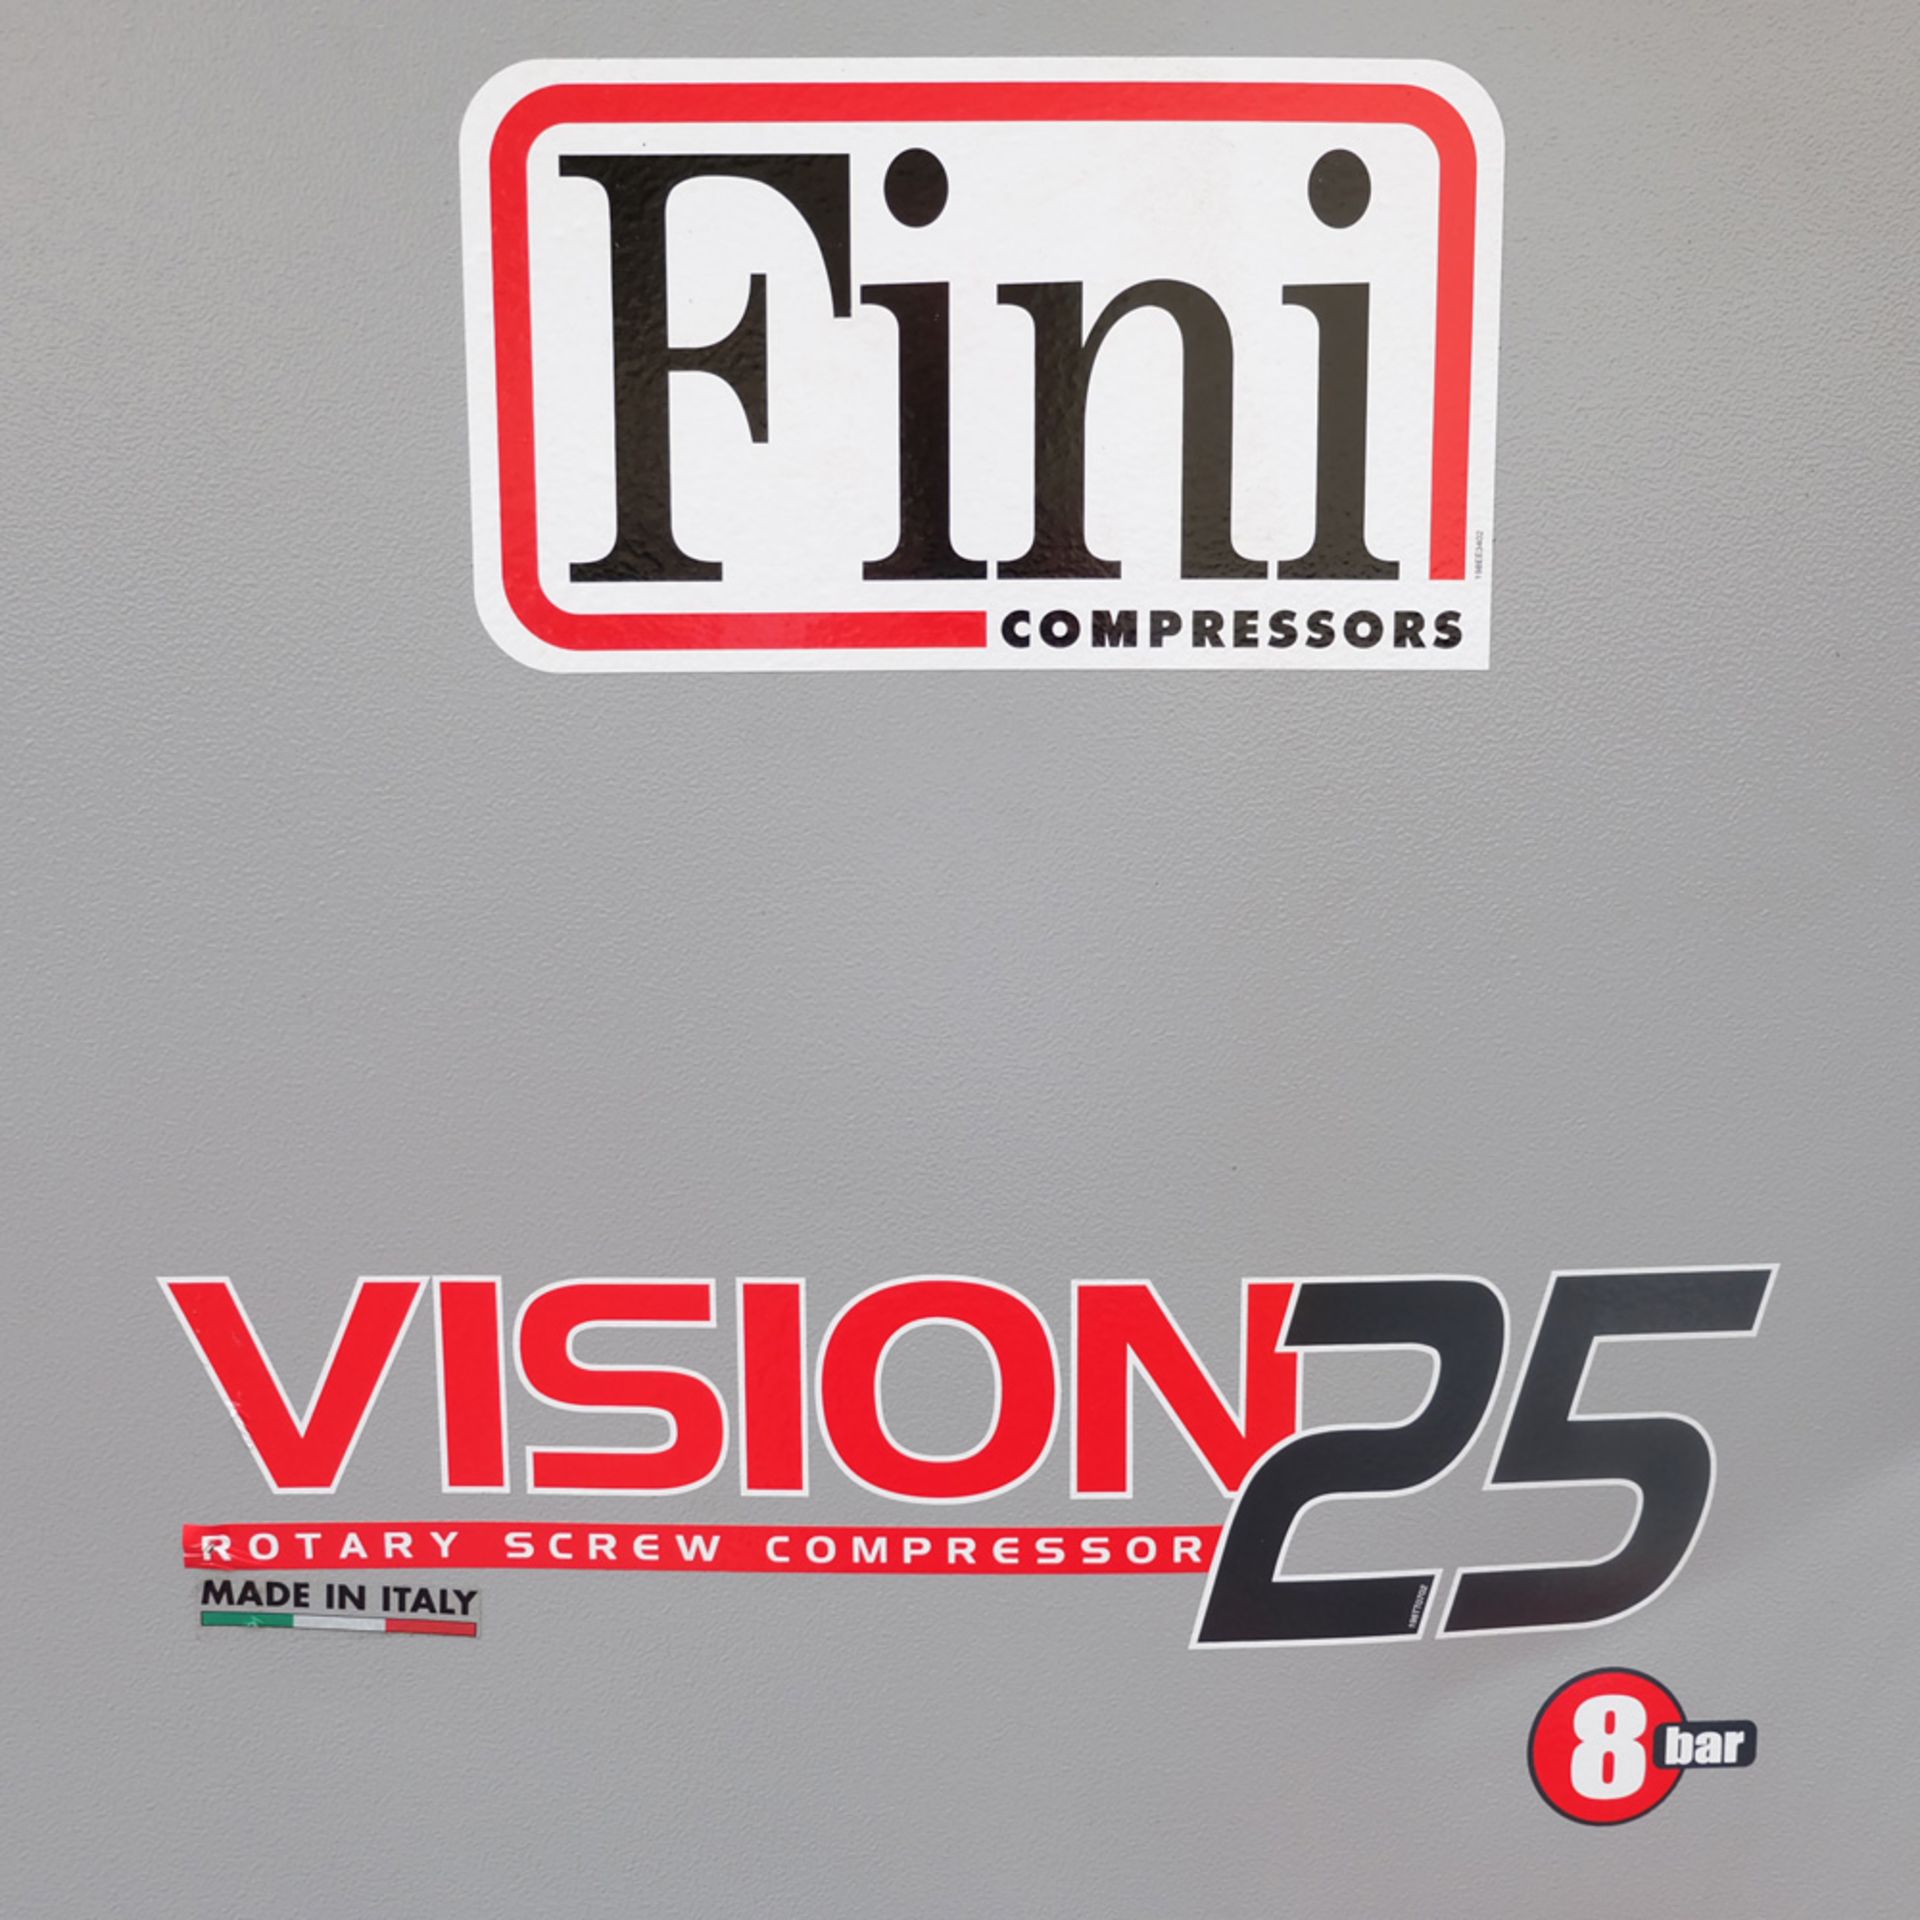 Fini Vision 25 Rotary Screw Compressor. Model: Vision 2508-500-ES-40050. Easy Tronic IV Control. - Image 3 of 11